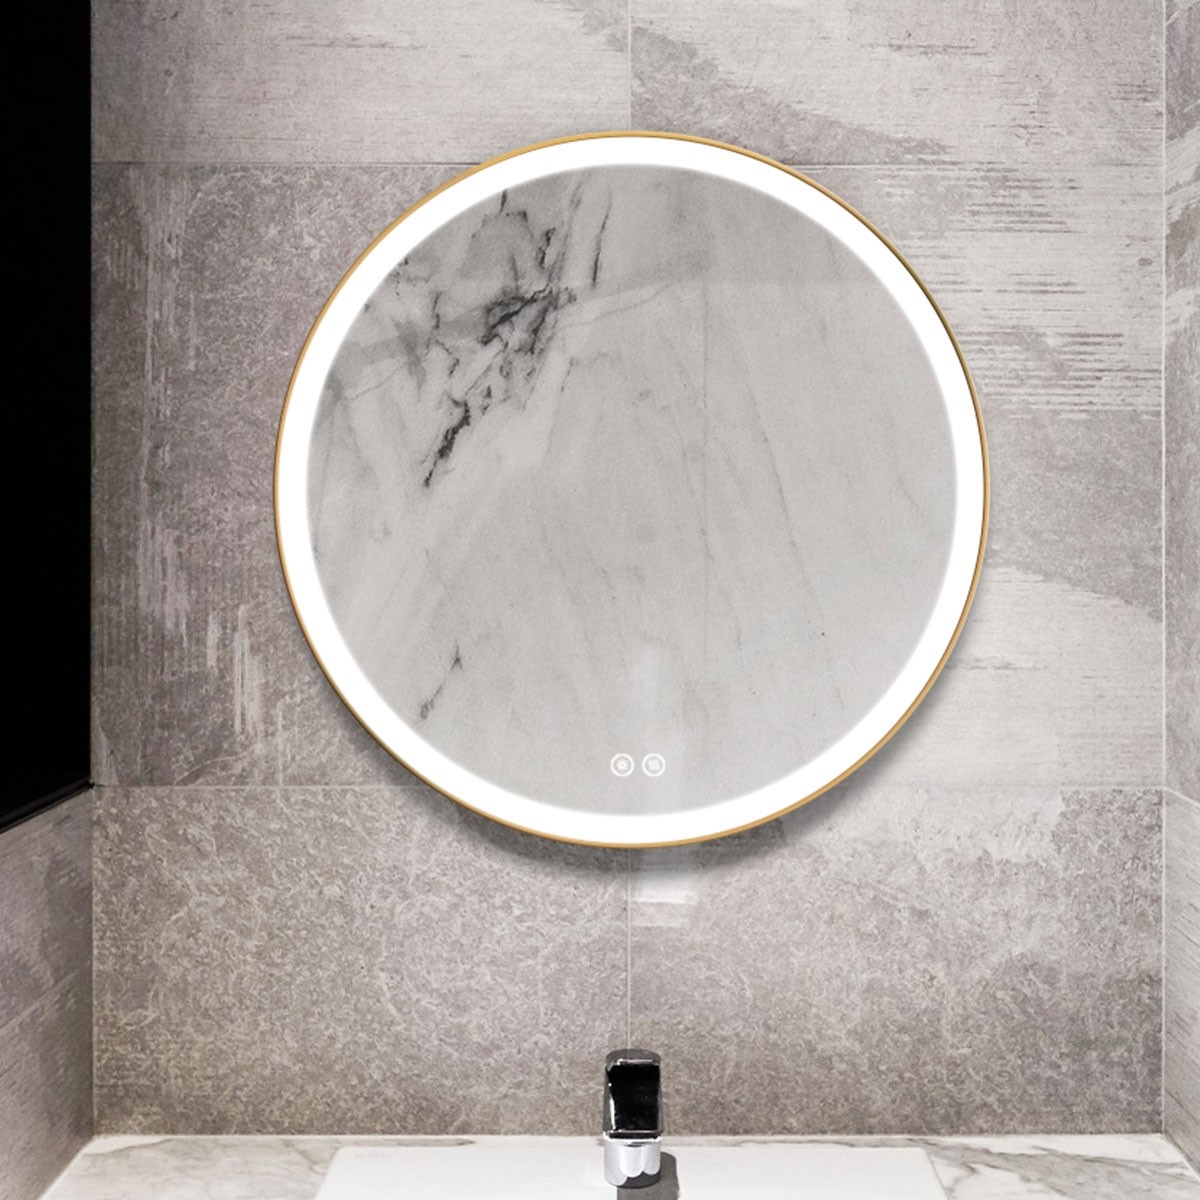 DECORAPORT 28 x 28 Inch LED Bathroom Mirror with Touch Button, Light Luxury Gold, Anti Fog, Dimmable, Vertical Mount (D902-2828)